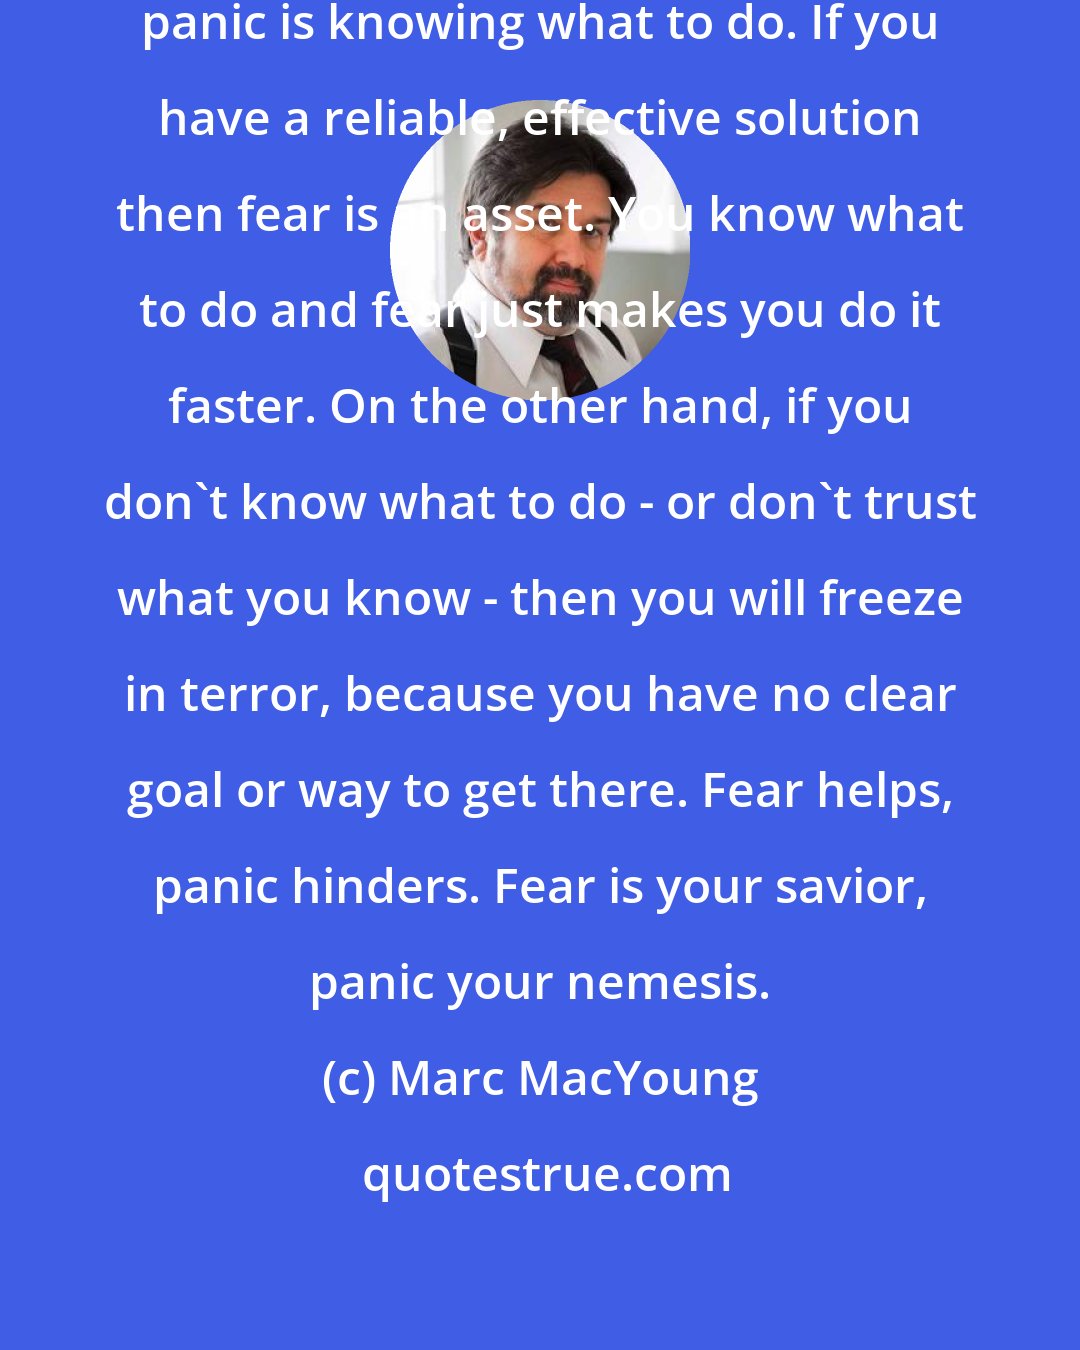 Marc MacYoung: The difference between fear and panic is knowing what to do. If you have a reliable, effective solution then fear is an asset. You know what to do and fear just makes you do it faster. On the other hand, if you don't know what to do - or don't trust what you know - then you will freeze in terror, because you have no clear goal or way to get there. Fear helps, panic hinders. Fear is your savior, panic your nemesis.